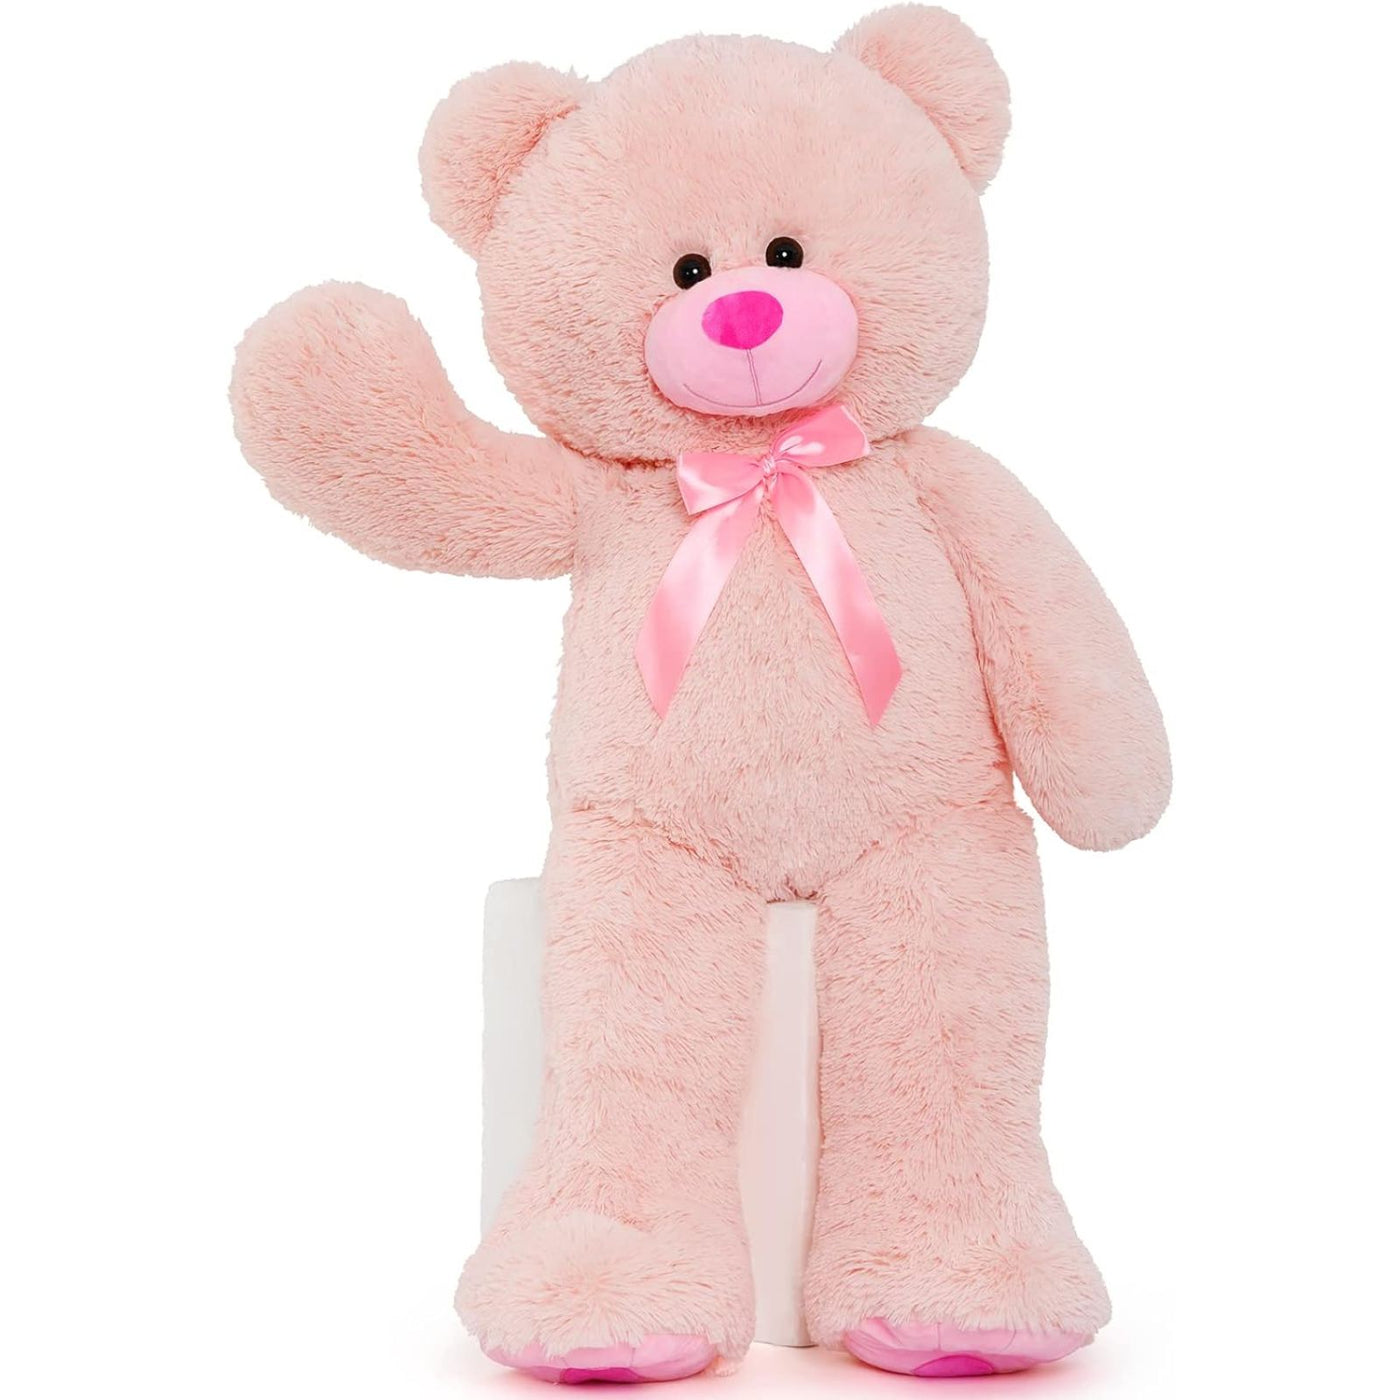 Giant Pink Teddy Bear Plush Toy, 35.4 Inches